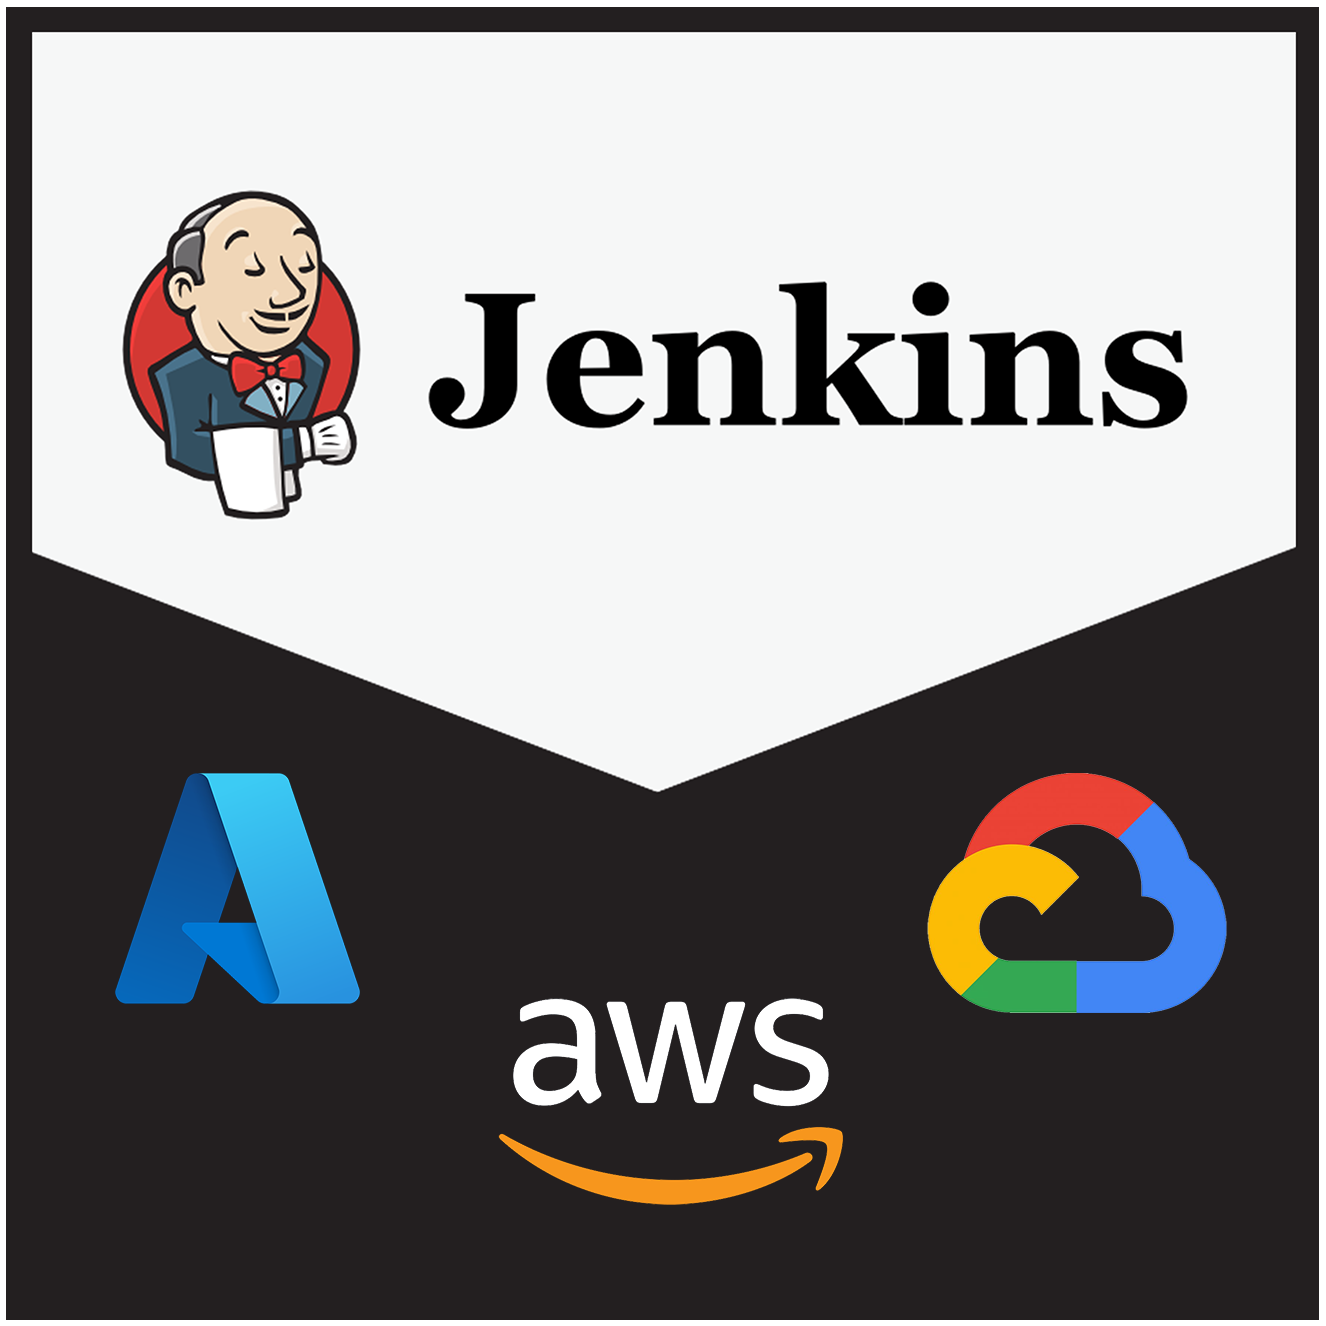 managed-jenkins-logo-with-stack@0.5x